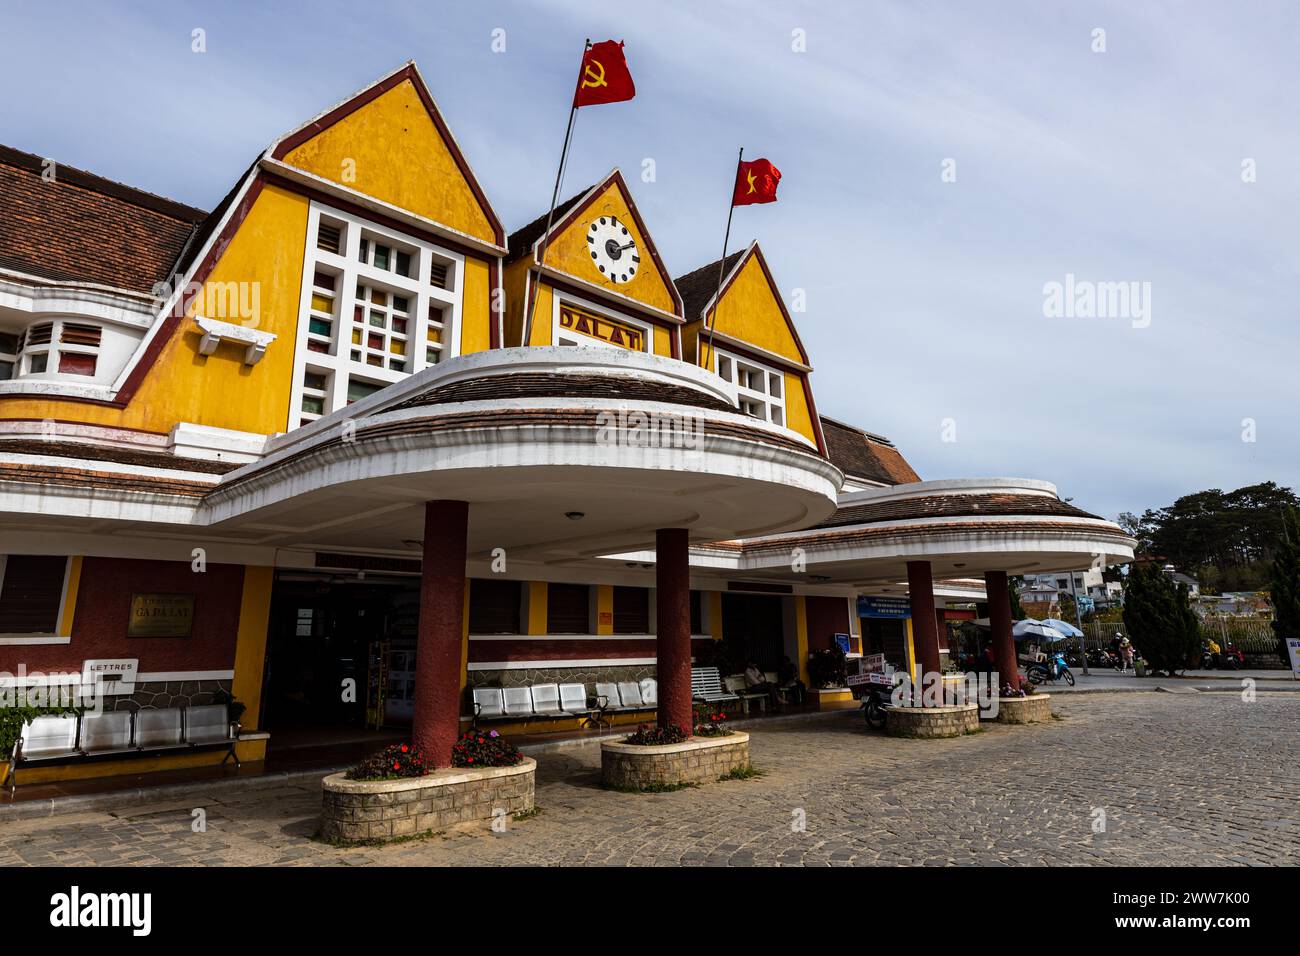 The old train station of Da Lat in Vietnam Stock Photo